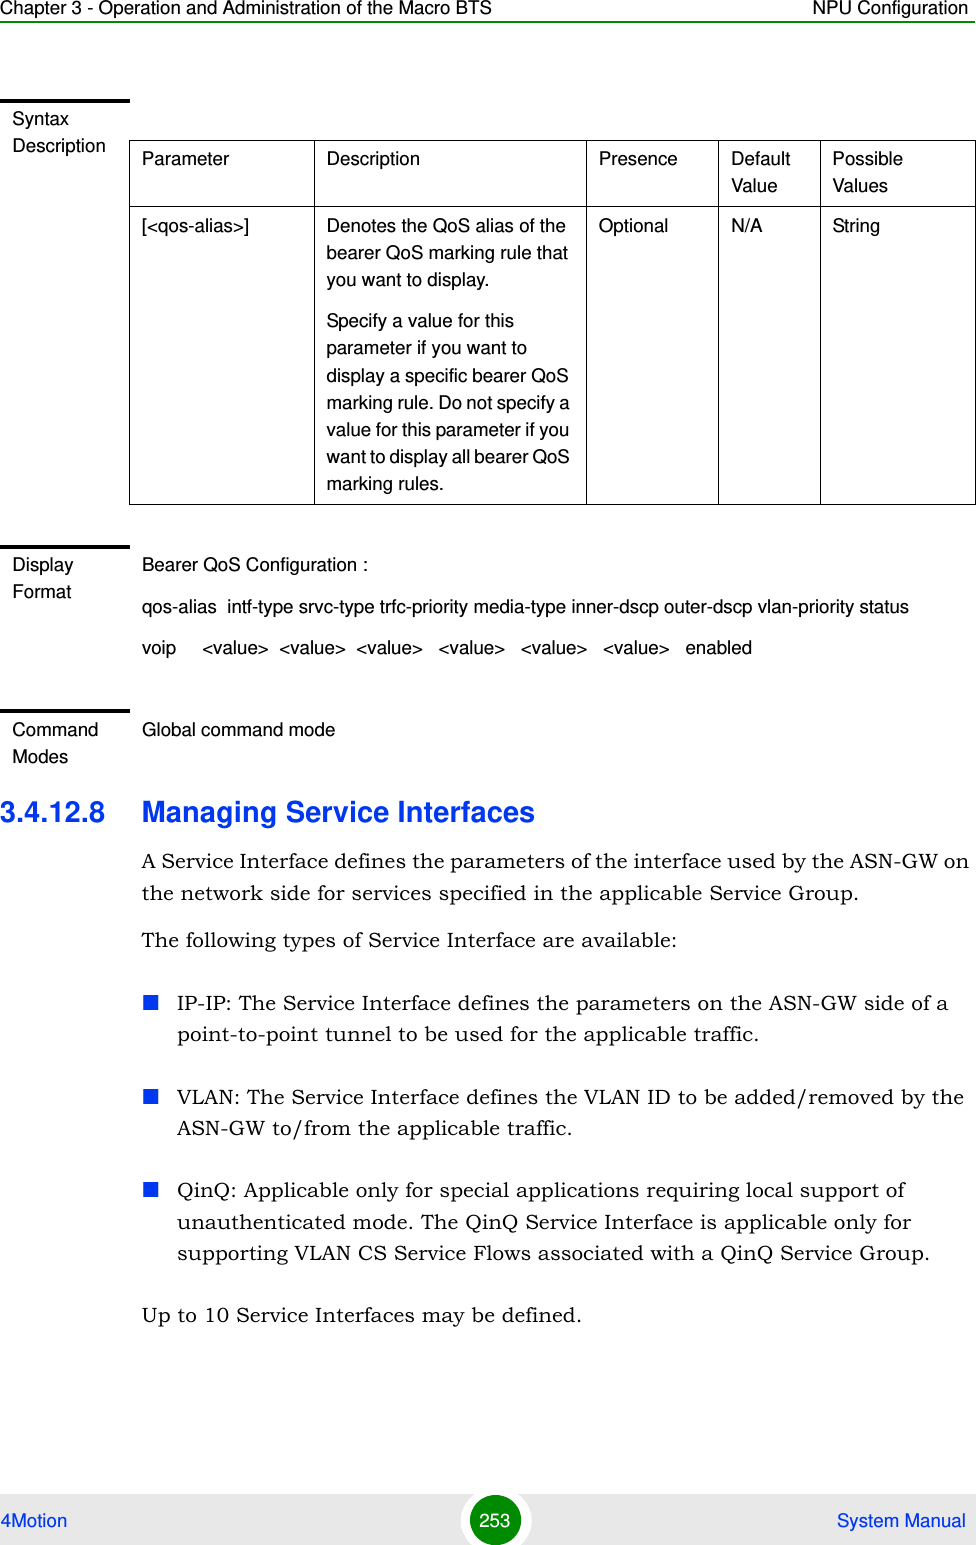 Chapter 3 - Operation and Administration of the Macro BTS NPU Configuration4Motion 253  System Manual3.4.12.8 Managing Service InterfacesA Service Interface defines the parameters of the interface used by the ASN-GW on the network side for services specified in the applicable Service Group.The following types of Service Interface are available:IP-IP: The Service Interface defines the parameters on the ASN-GW side of a point-to-point tunnel to be used for the applicable traffic.VLAN: The Service Interface defines the VLAN ID to be added/removed by the ASN-GW to/from the applicable traffic.QinQ: Applicable only for special applications requiring local support of unauthenticated mode. The QinQ Service Interface is applicable only for supporting VLAN CS Service Flows associated with a QinQ Service Group.Up to 10 Service Interfaces may be defined. Syntax Description Parameter Description Presence Default ValuePossible Values[&lt;qos-alias&gt;] Denotes the QoS alias of the bearer QoS marking rule that you want to display. Specify a value for this parameter if you want to display a specific bearer QoS marking rule. Do not specify a value for this parameter if you want to display all bearer QoS marking rules.Optional N/A StringDisplay FormatBearer QoS Configuration :qos-alias  intf-type srvc-type trfc-priority media-type inner-dscp outer-dscp vlan-priority statusvoip     &lt;value&gt;  &lt;value&gt;  &lt;value&gt;   &lt;value&gt;   &lt;value&gt;   &lt;value&gt;   enabledCommand ModesGlobal command mode